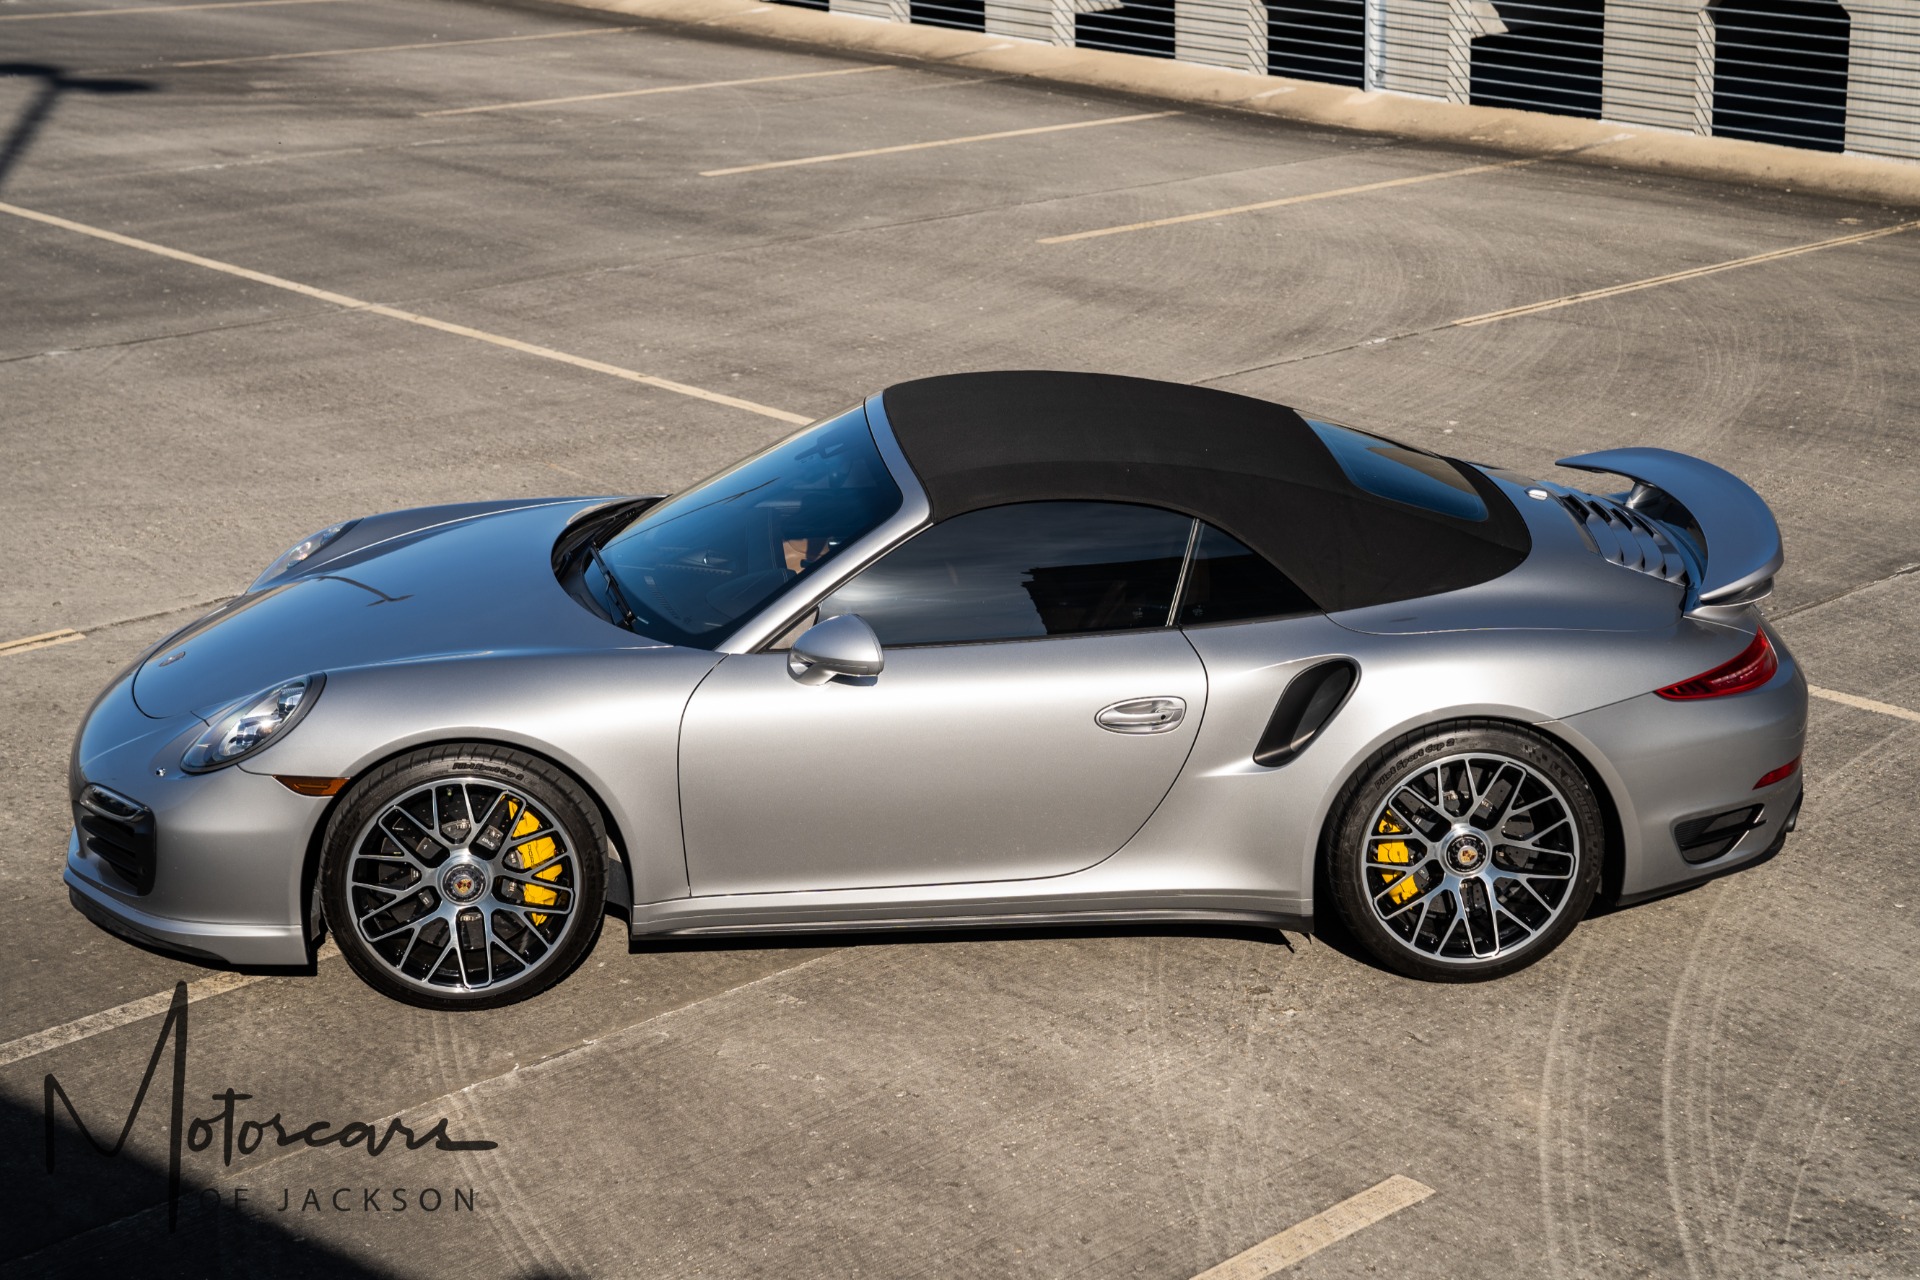 Used-2015-Porsche-911-Turbo-S-Cabriolet-for-sale-Jackson-MS